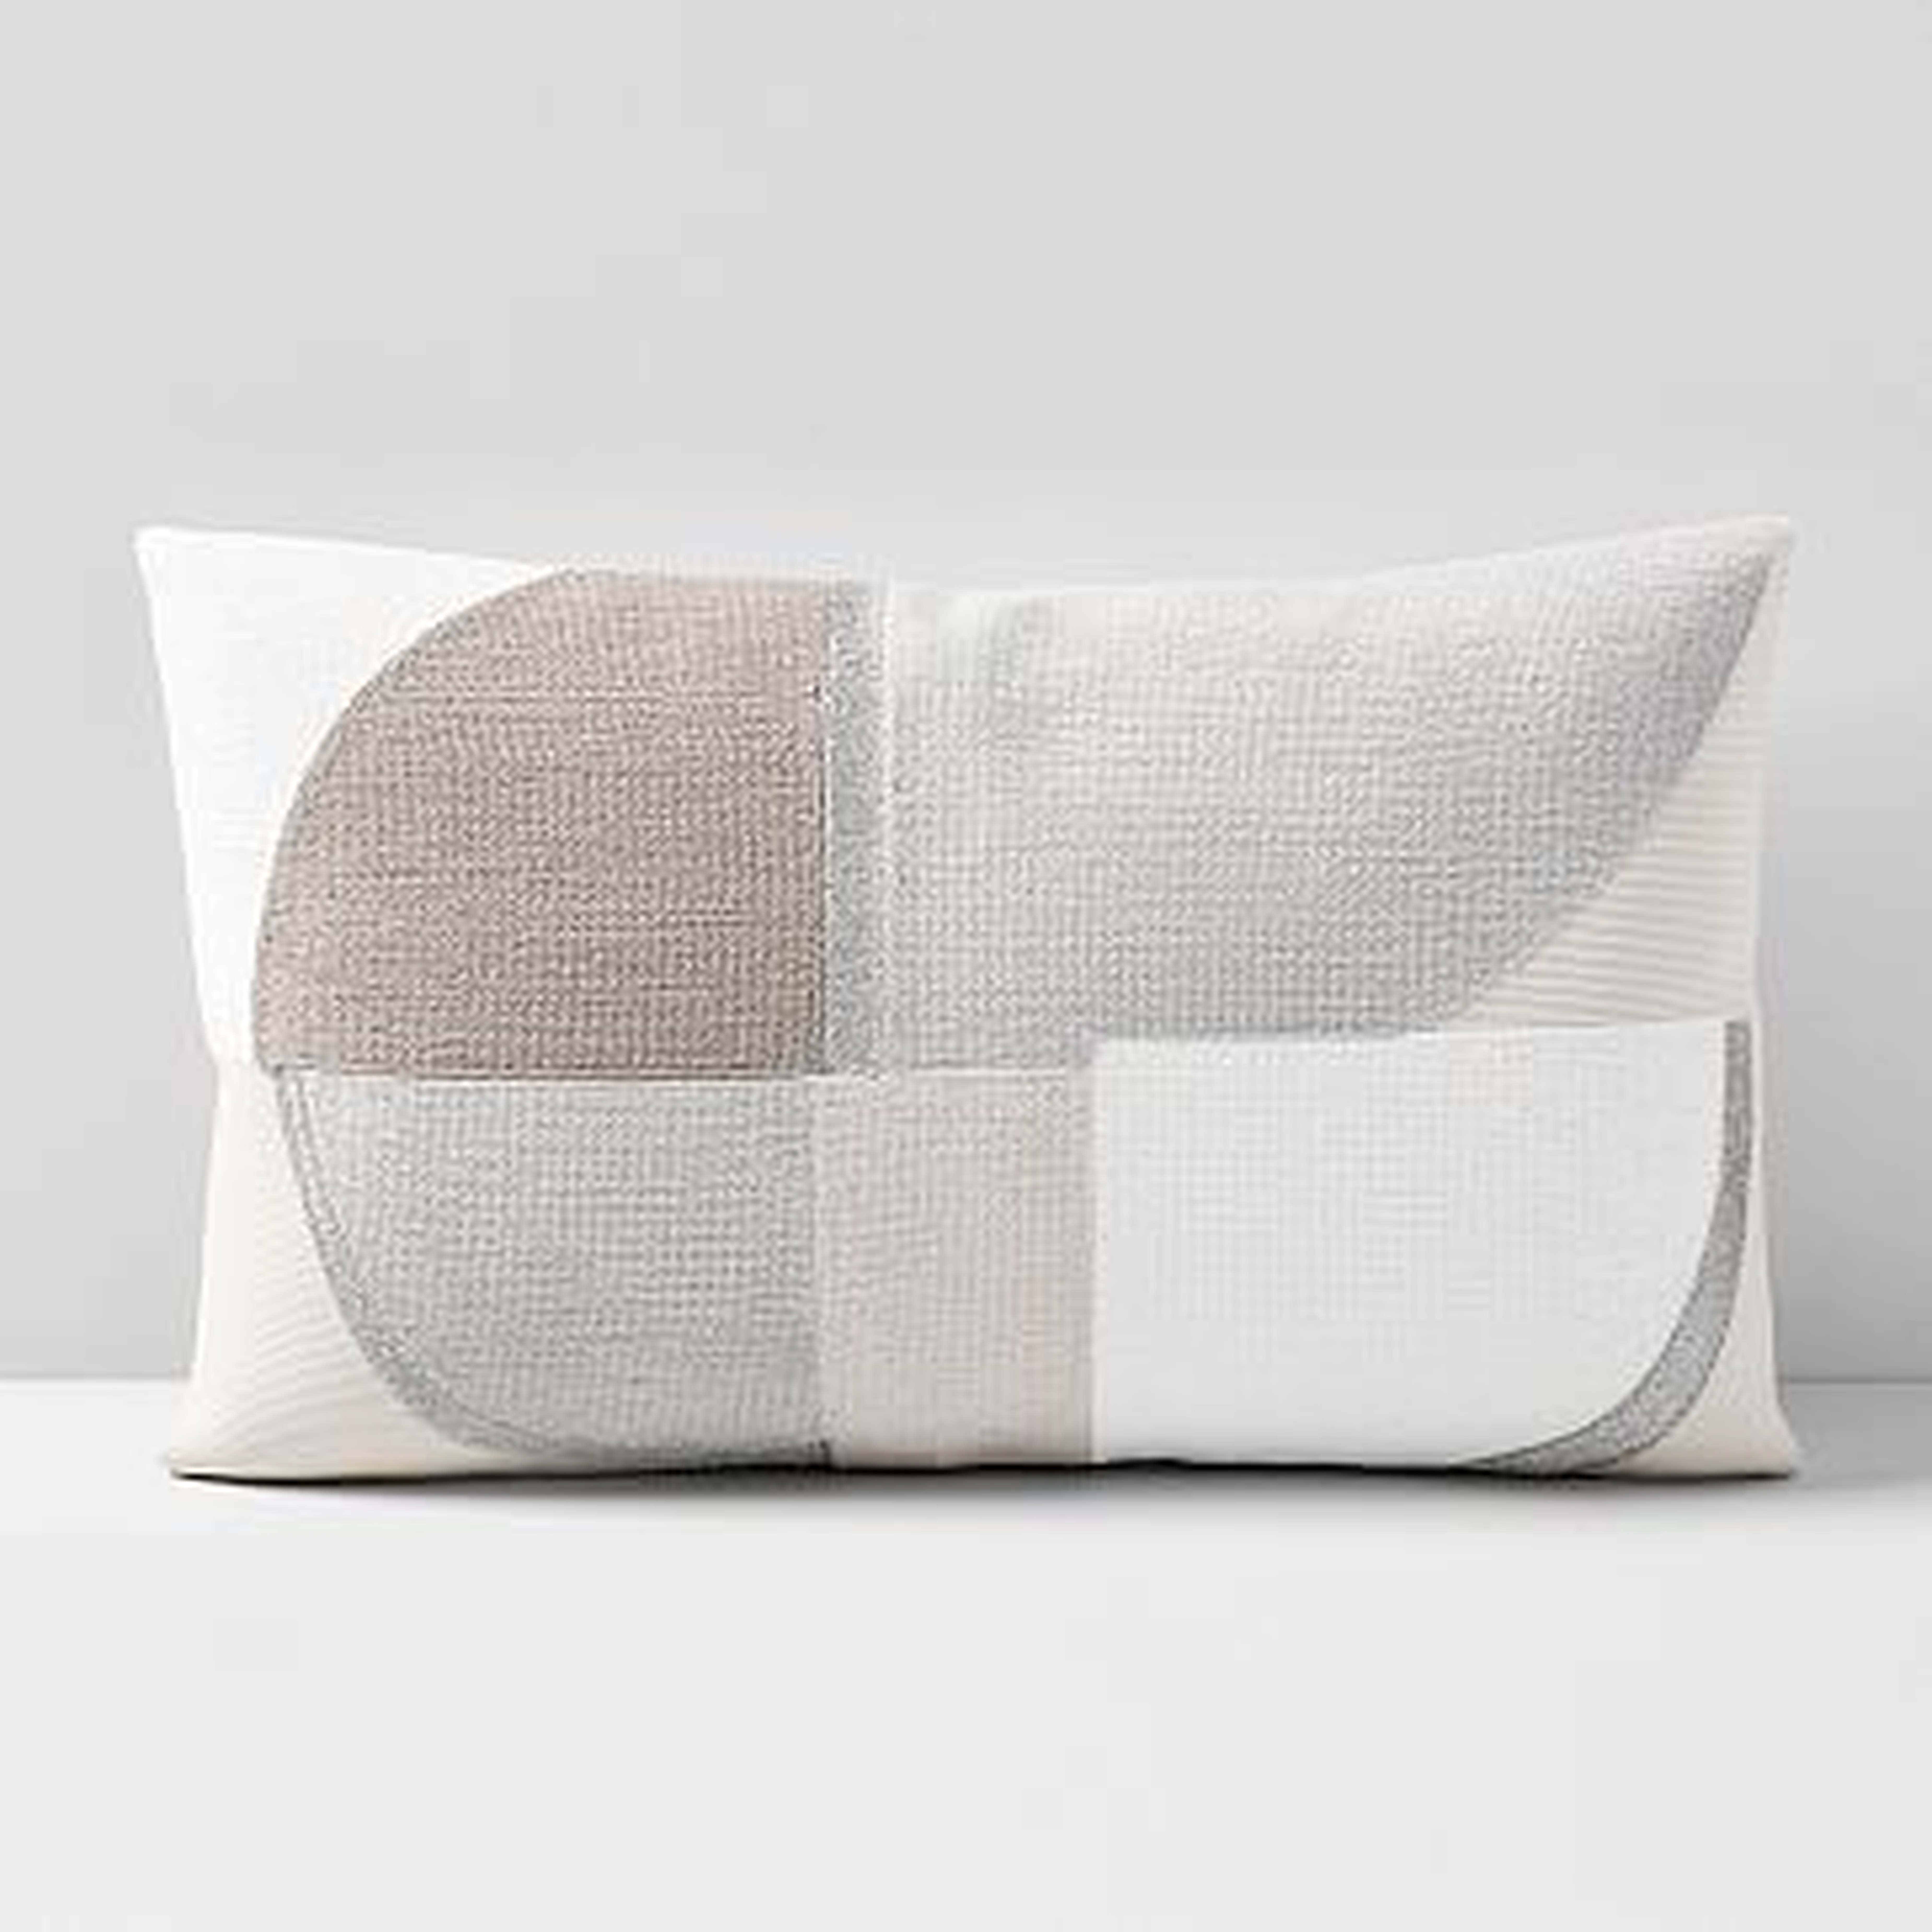 Corded Quadrant Pillow Cover, 12"x21", Frost Gray - West Elm